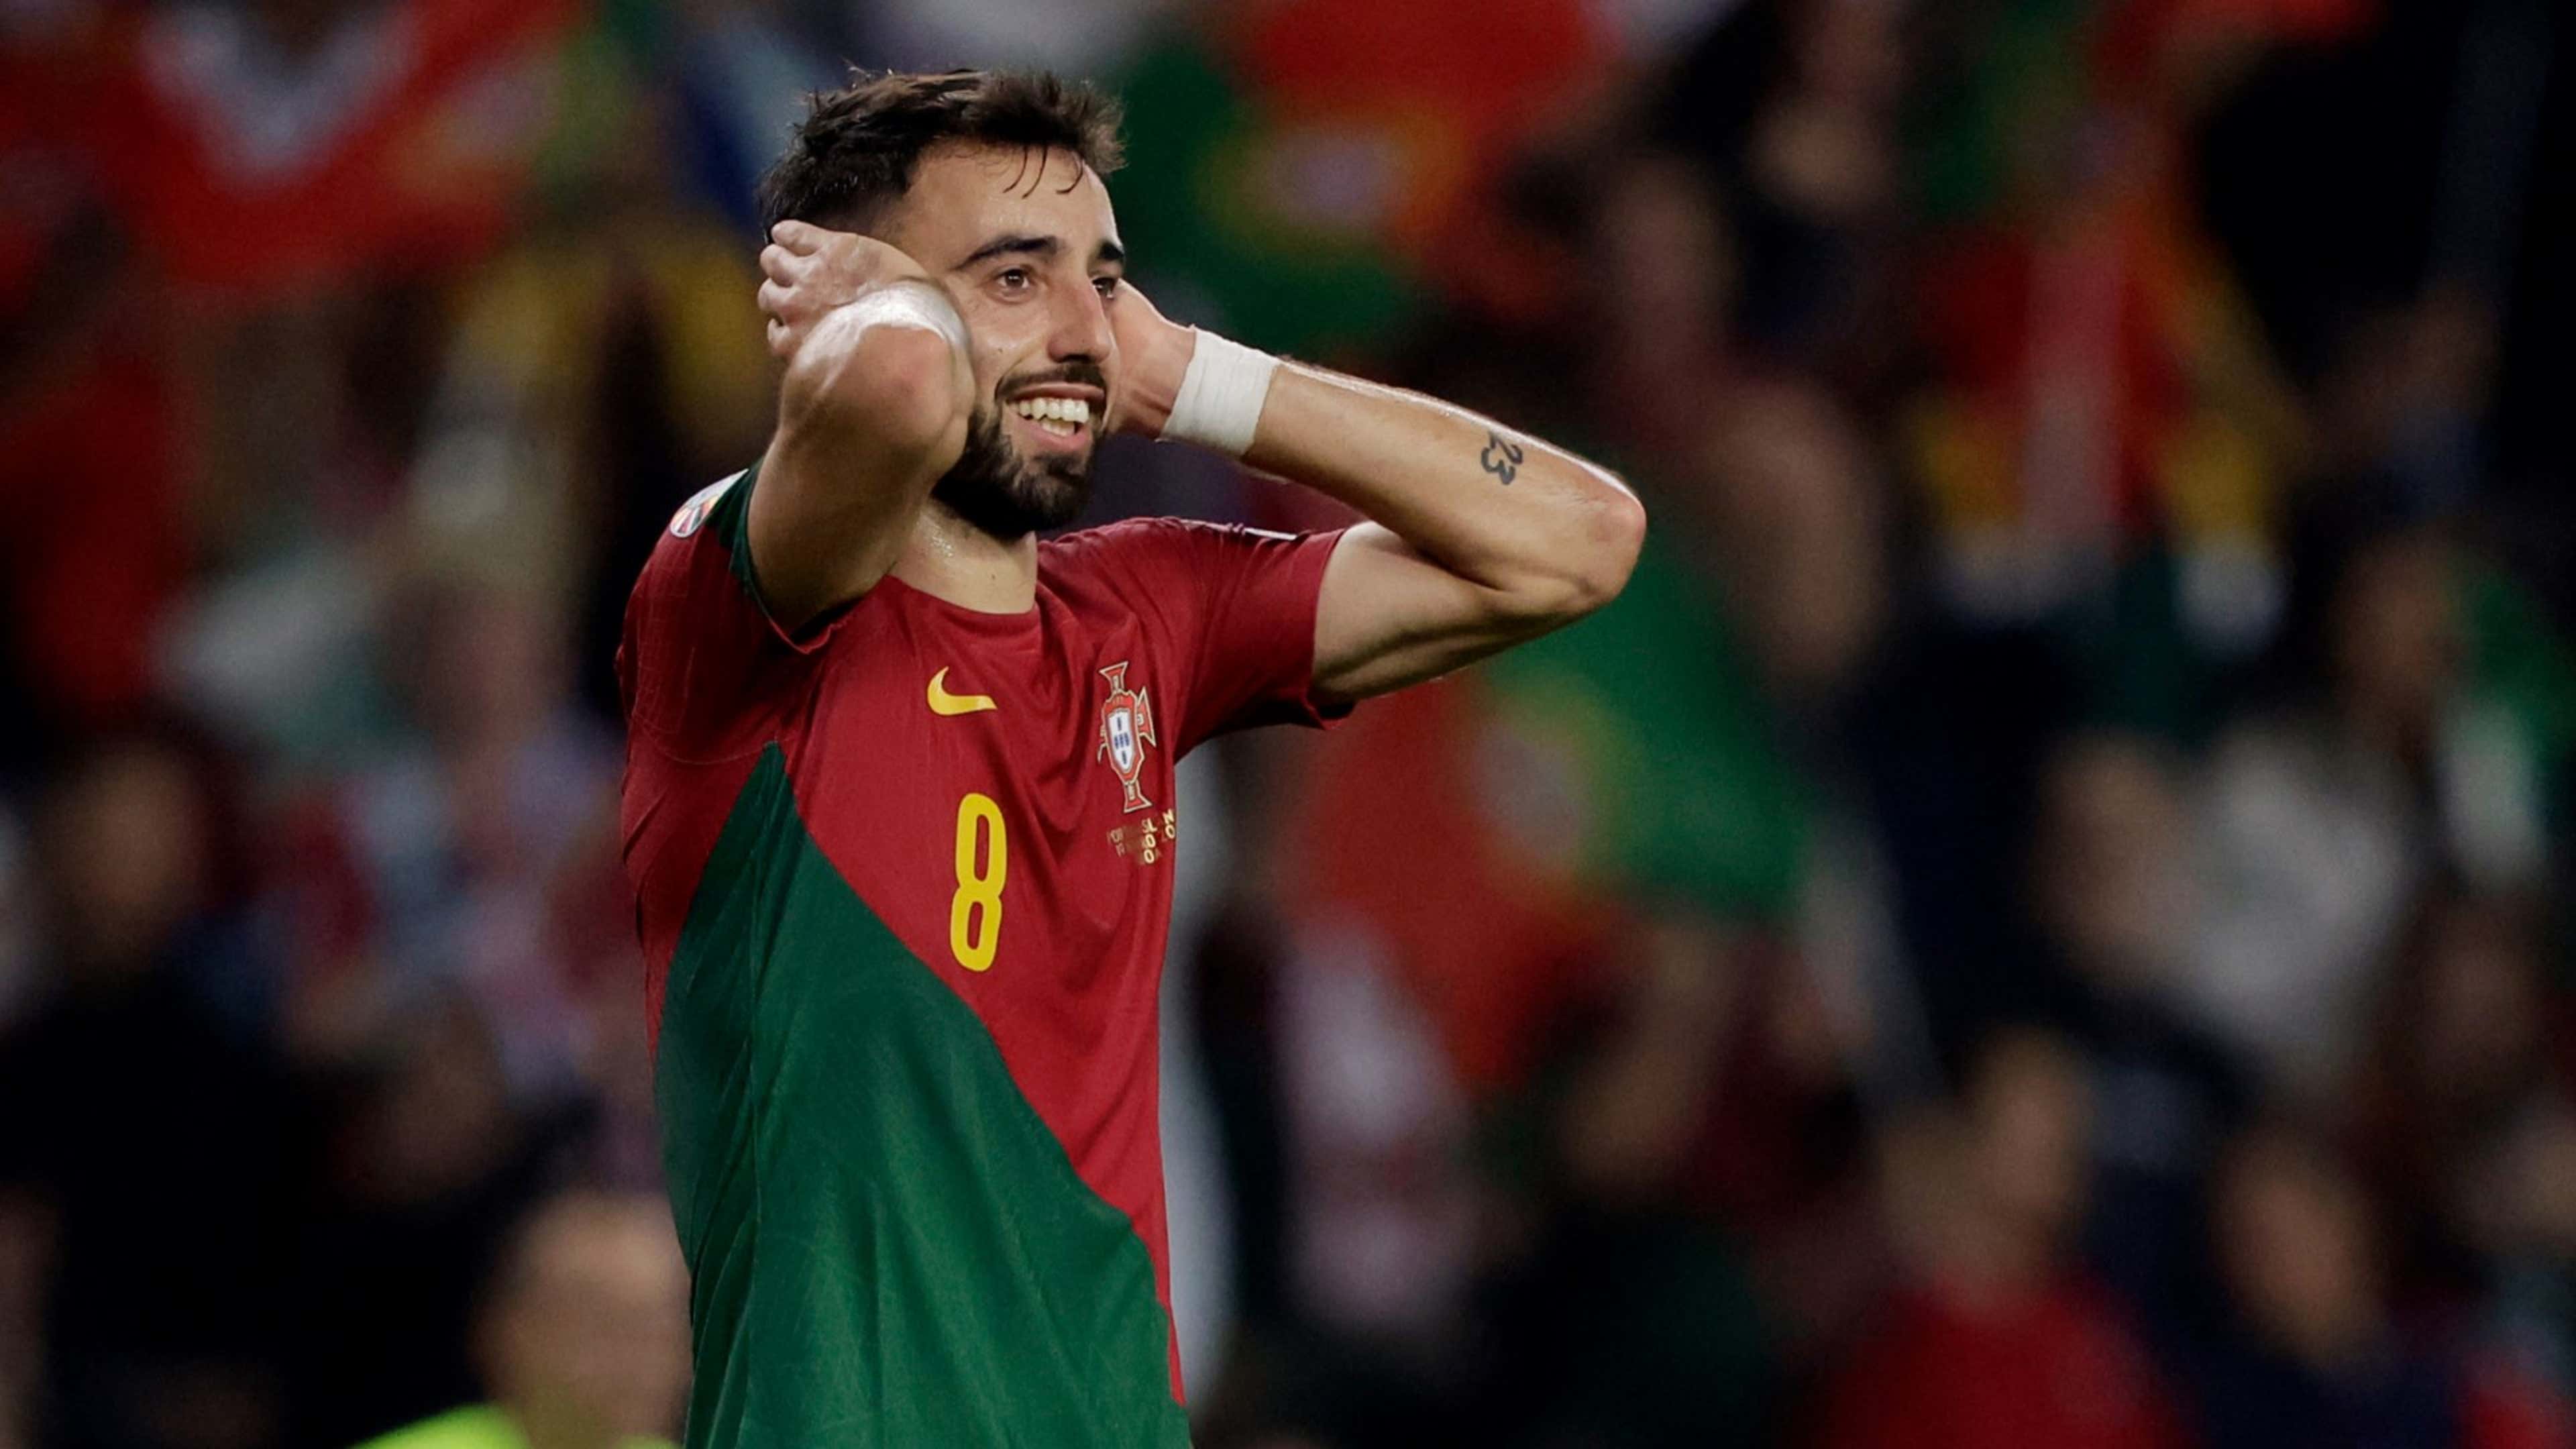 WATCH: That's the Bruno Fernandes Man Utd need! Portugal star breaks  deadlock against Iceland with sublime strike | Goal.com